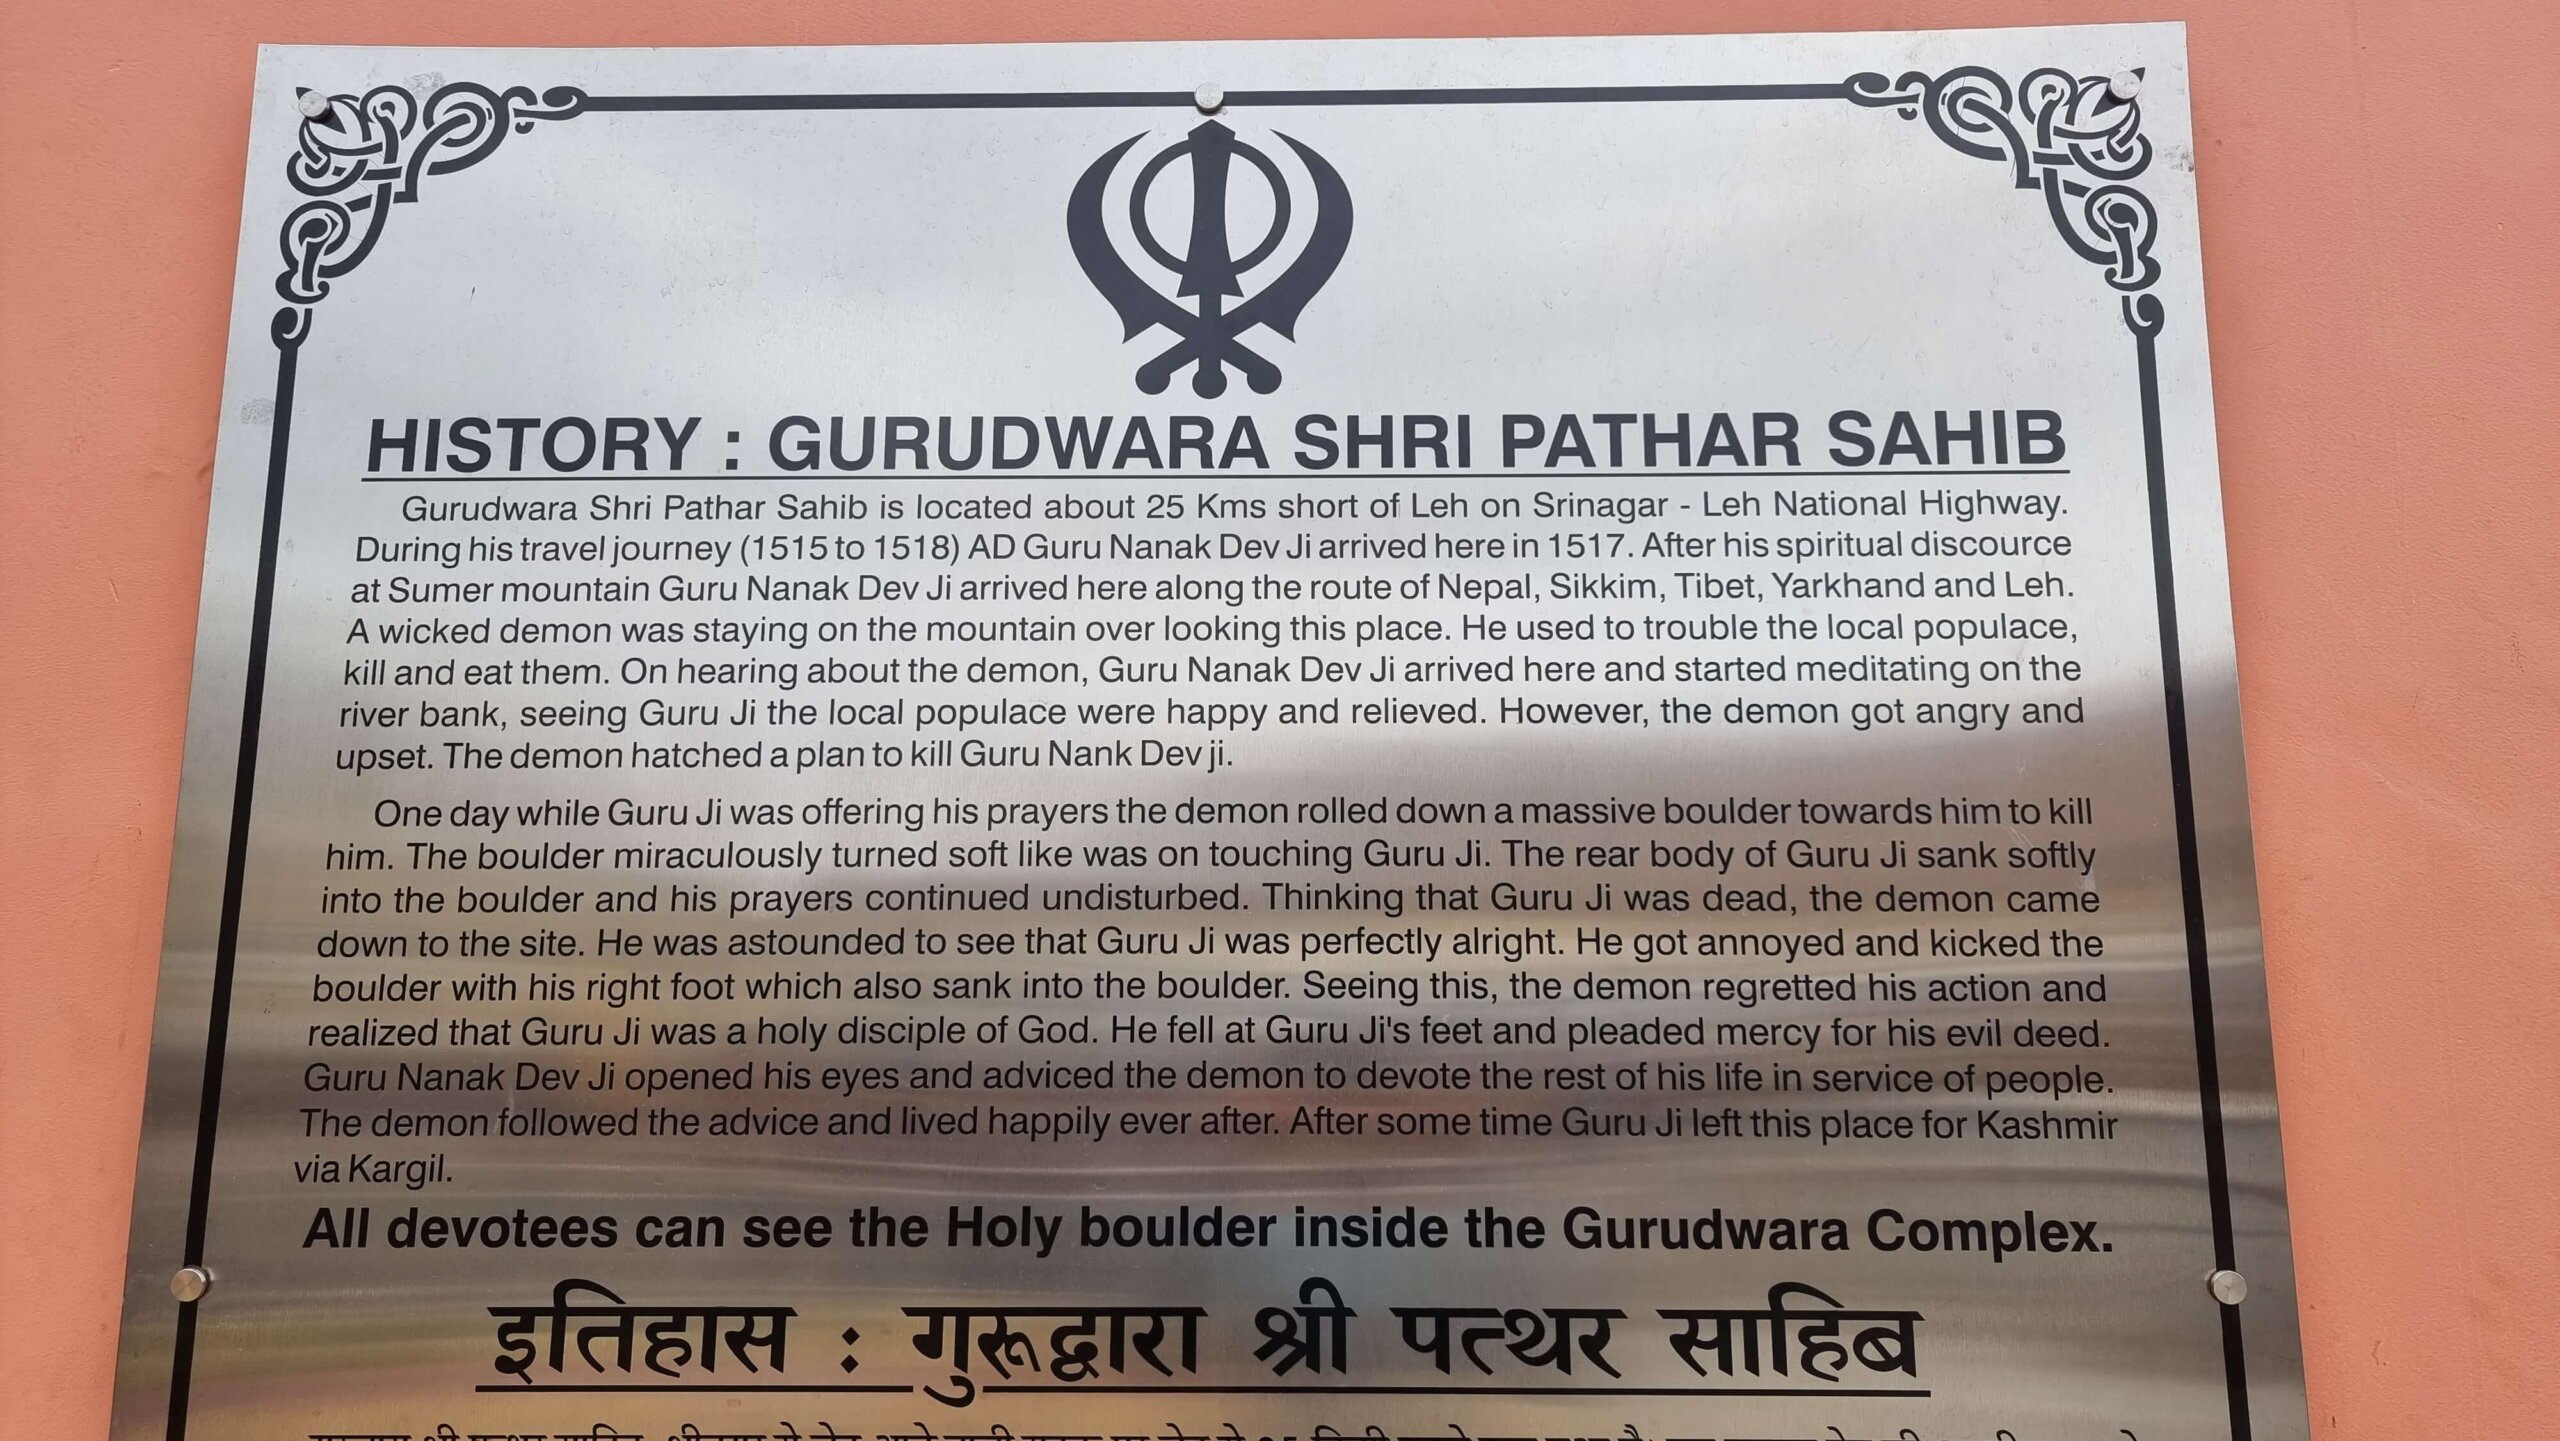 The history of Gurudwara Shri Pathar Sahib can be read on a metal board placed at the entrance of the site